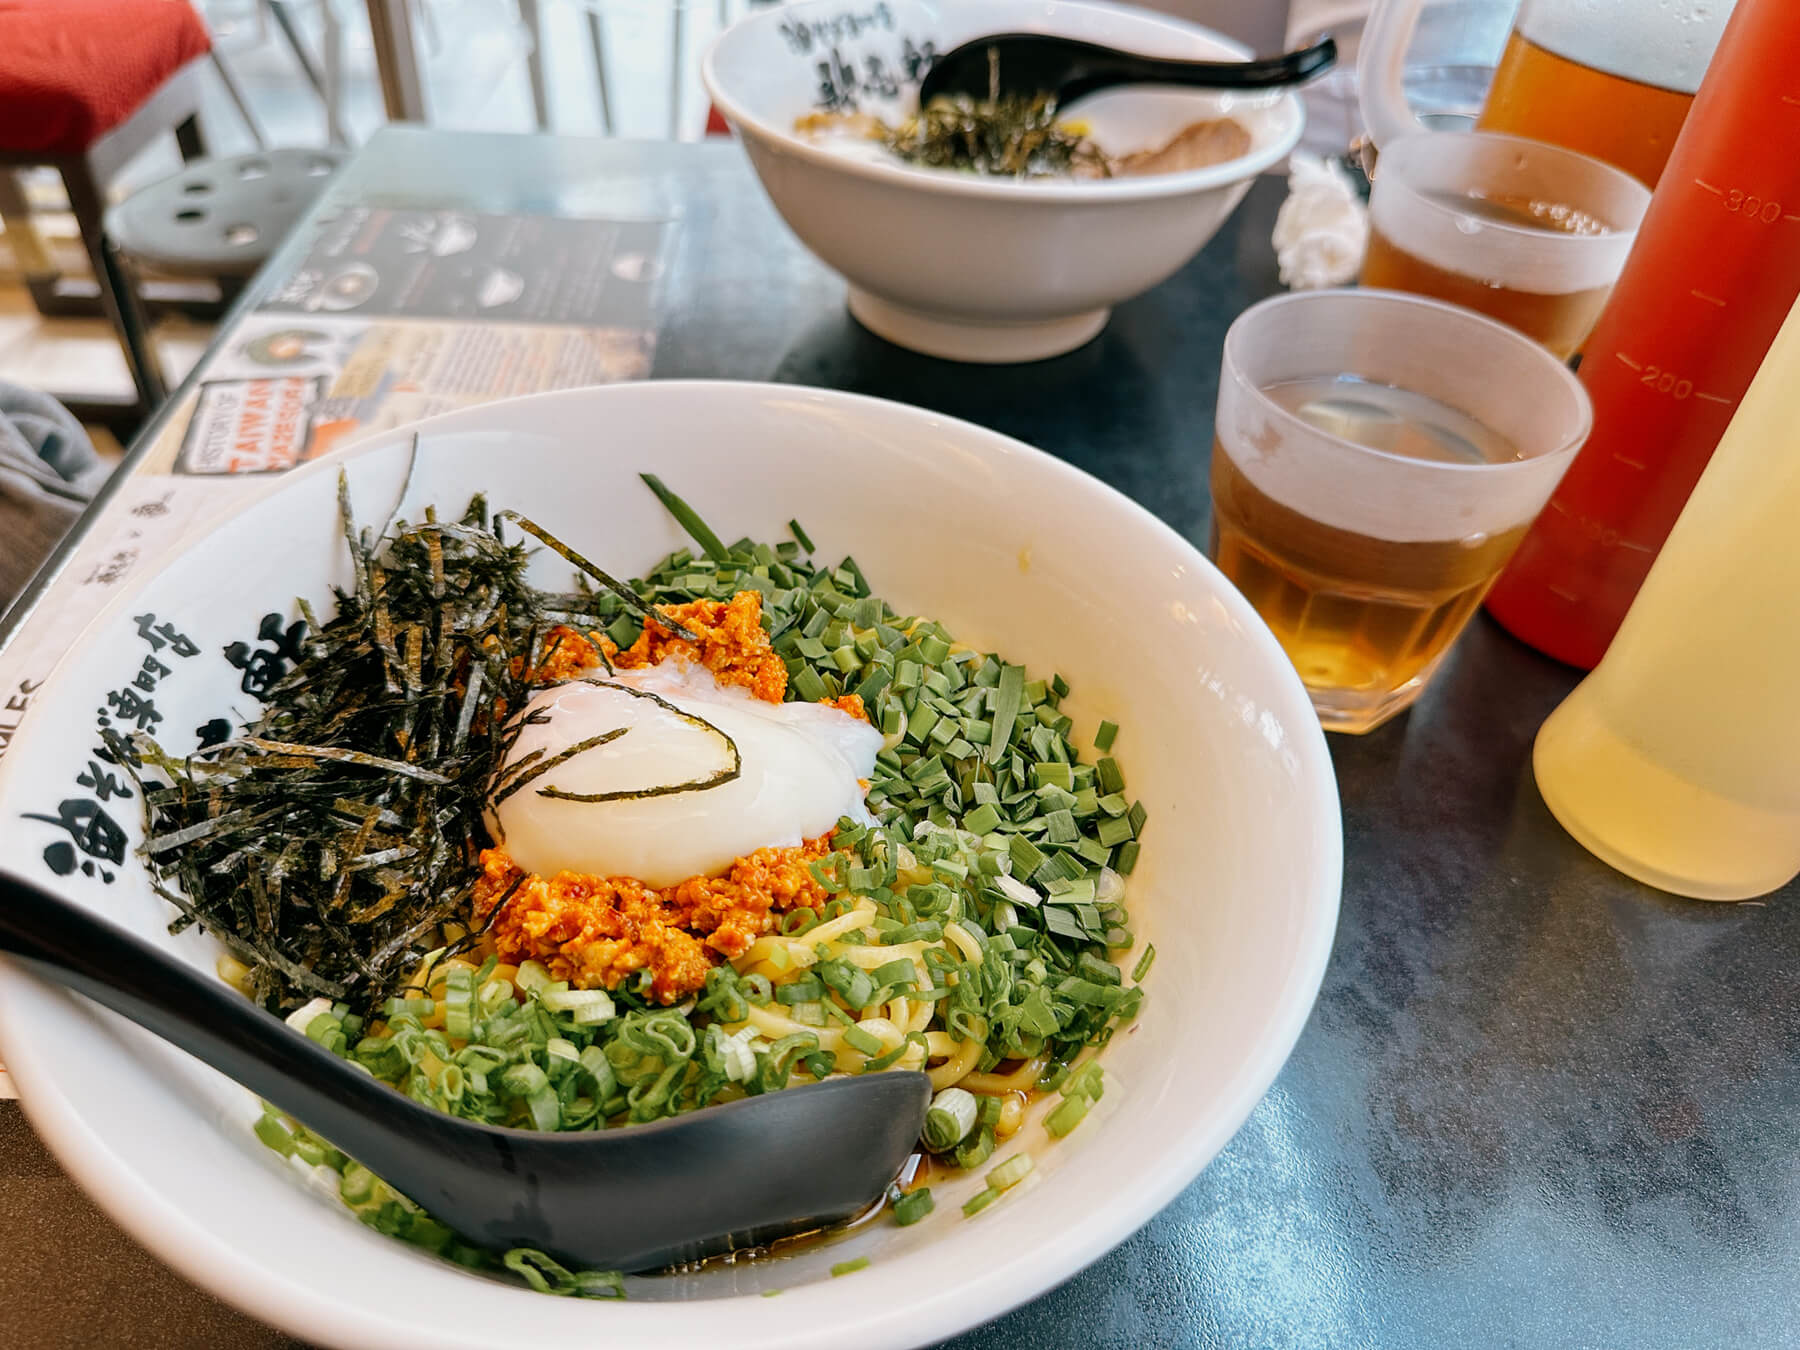 a photo of dry ramen-like noodles with many toppings, including a soft boiled egg